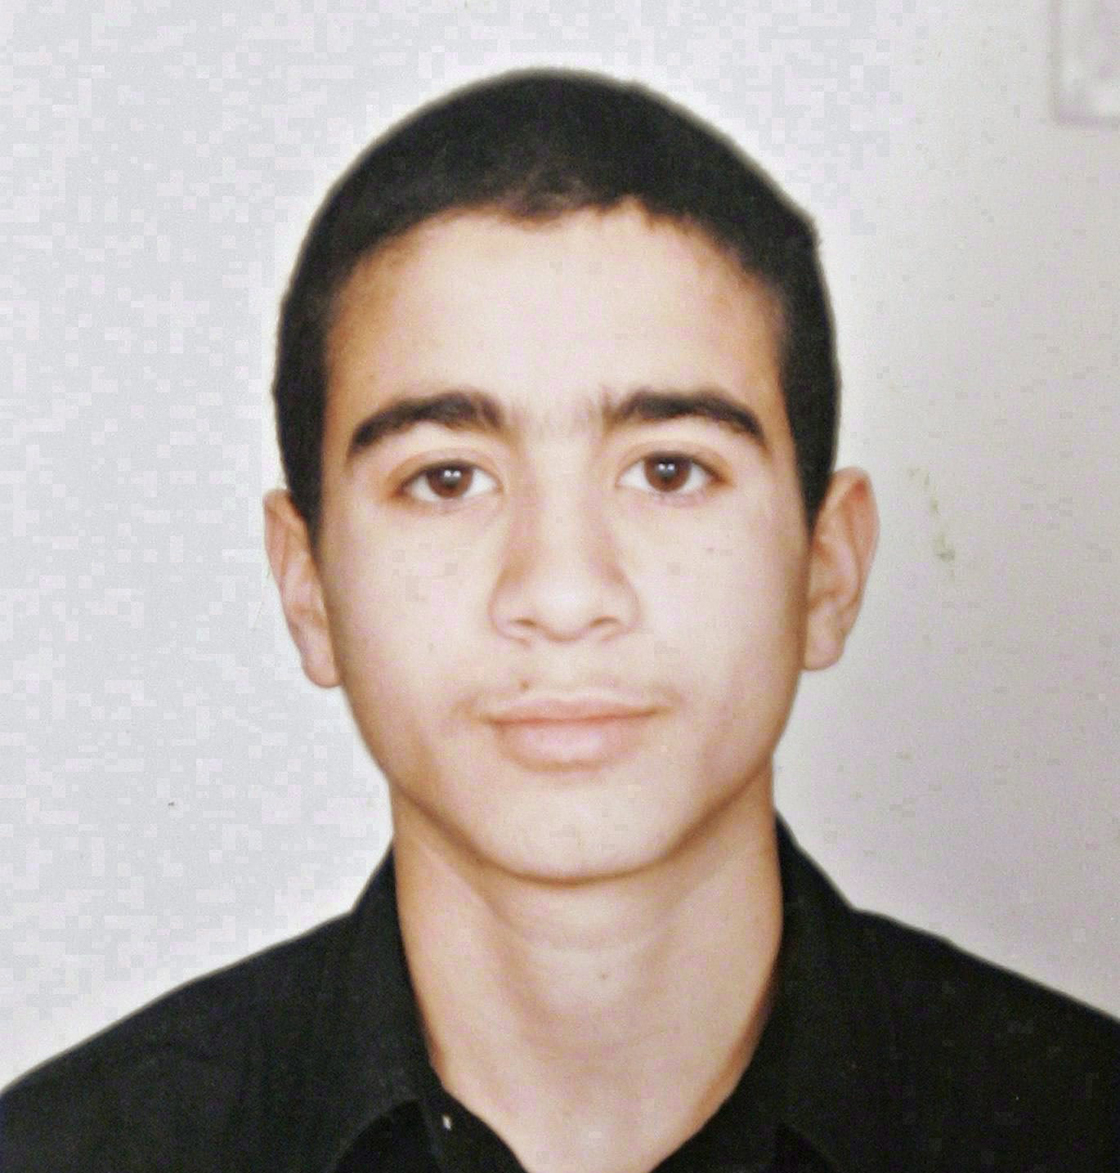 A photo of Omar Khadr, taken before he was imprisioned in 2002.